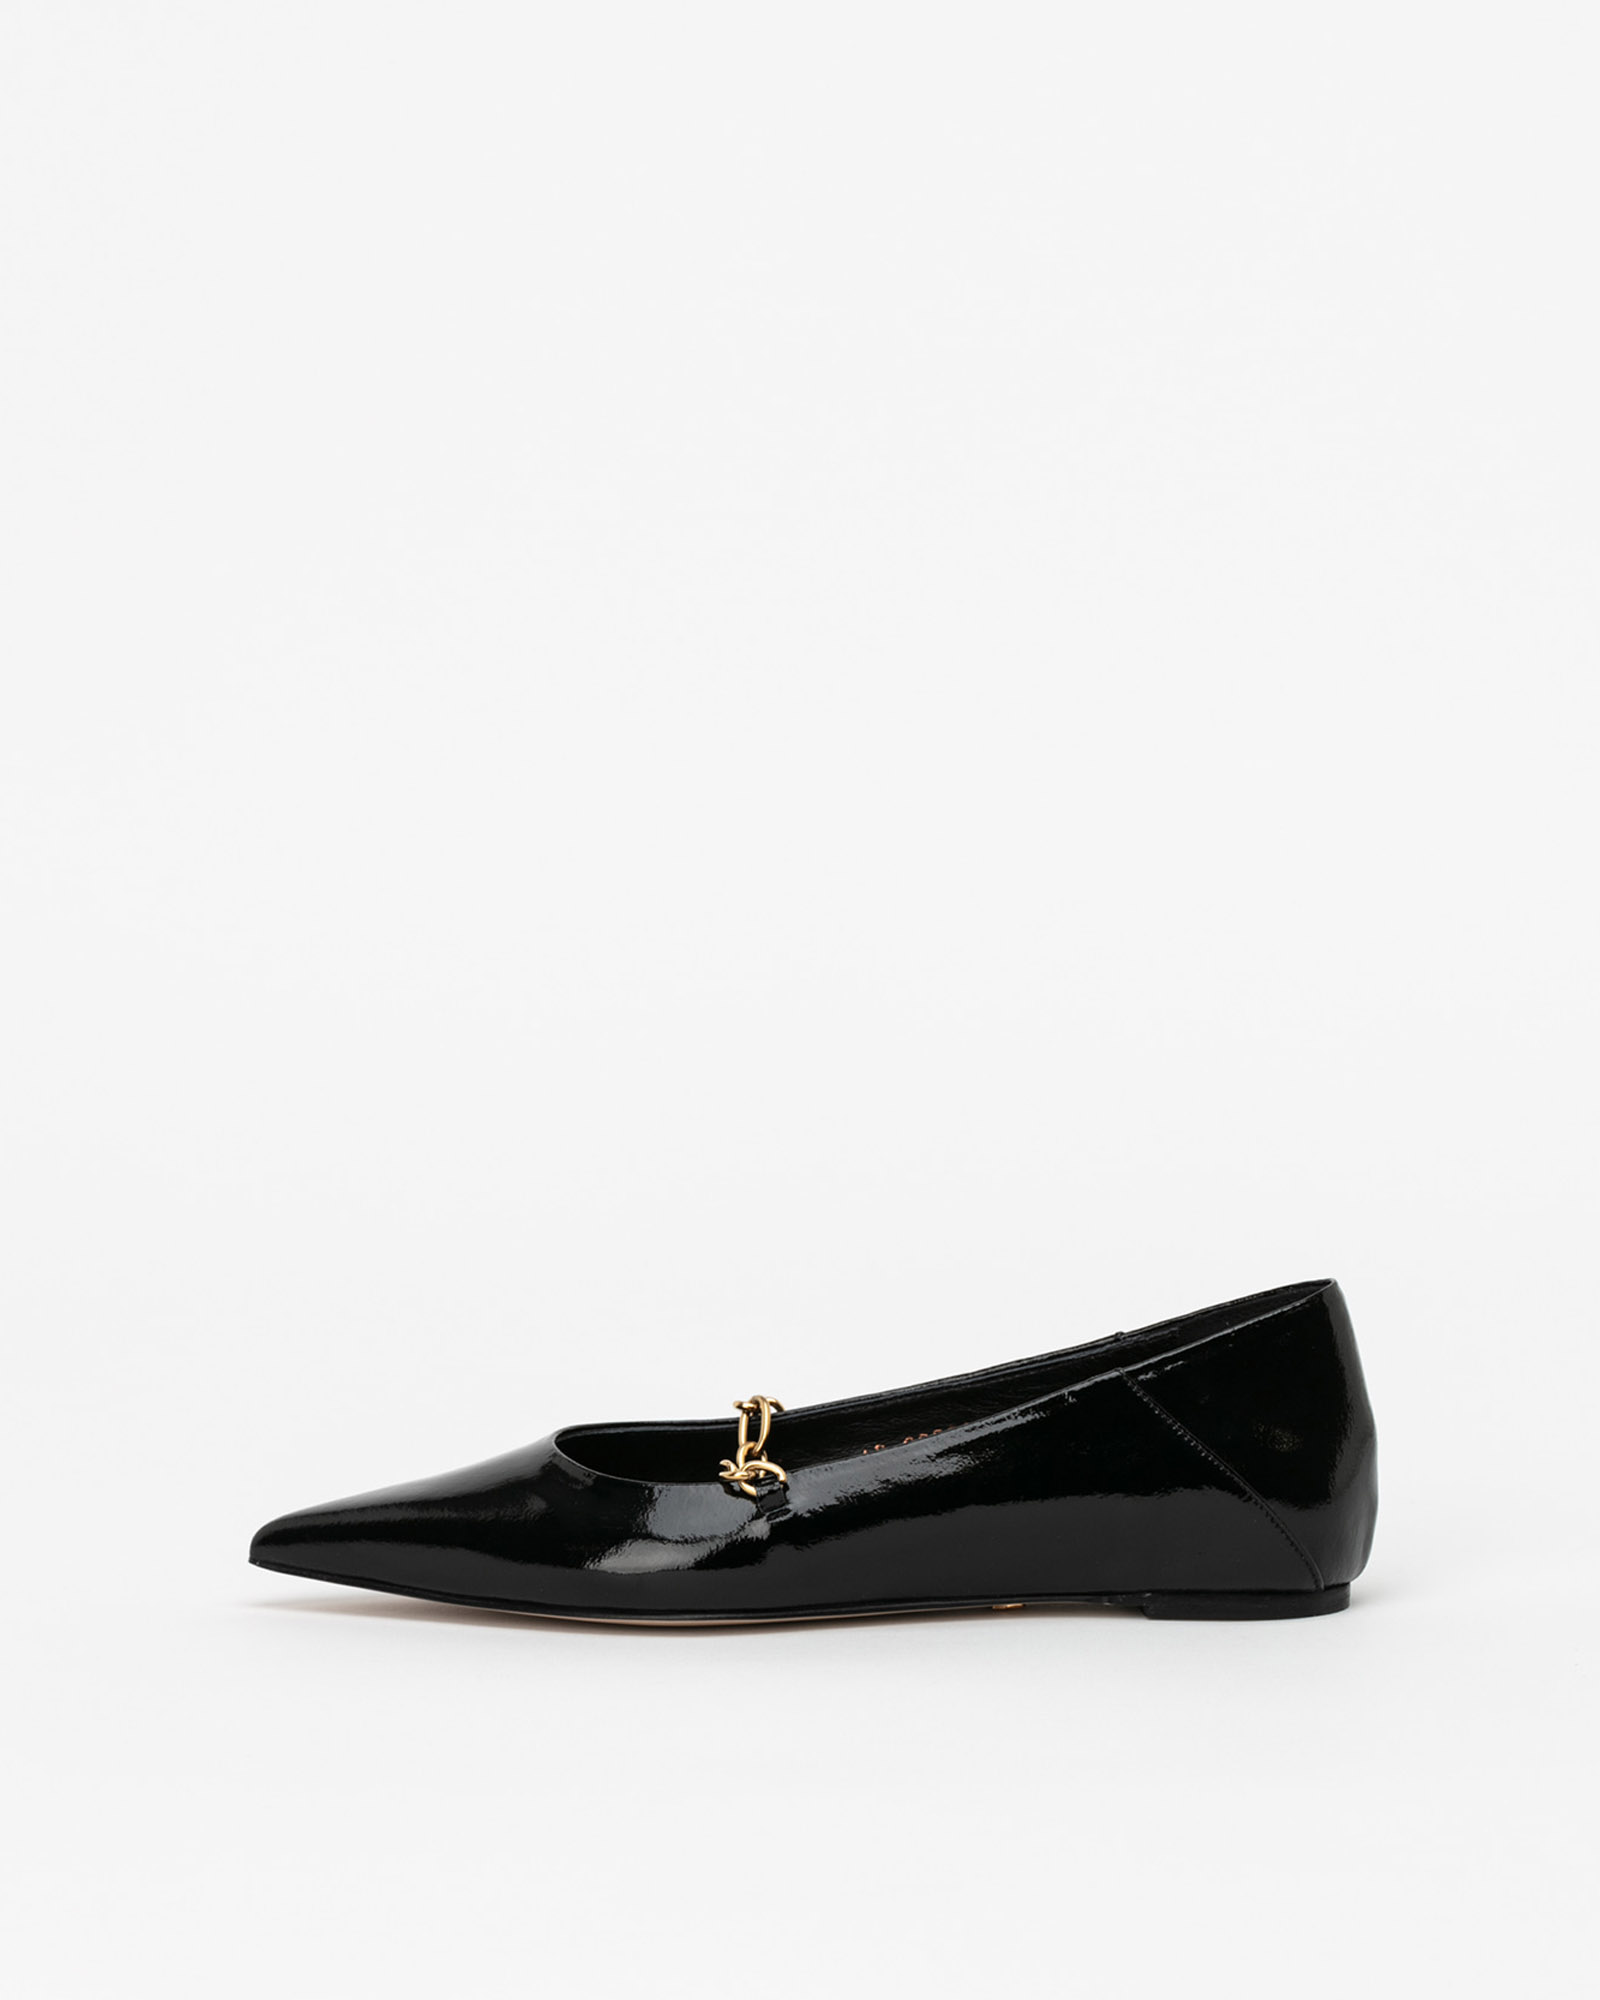 Chateau Chained Flat Shoes in Black Wrinkled Patent